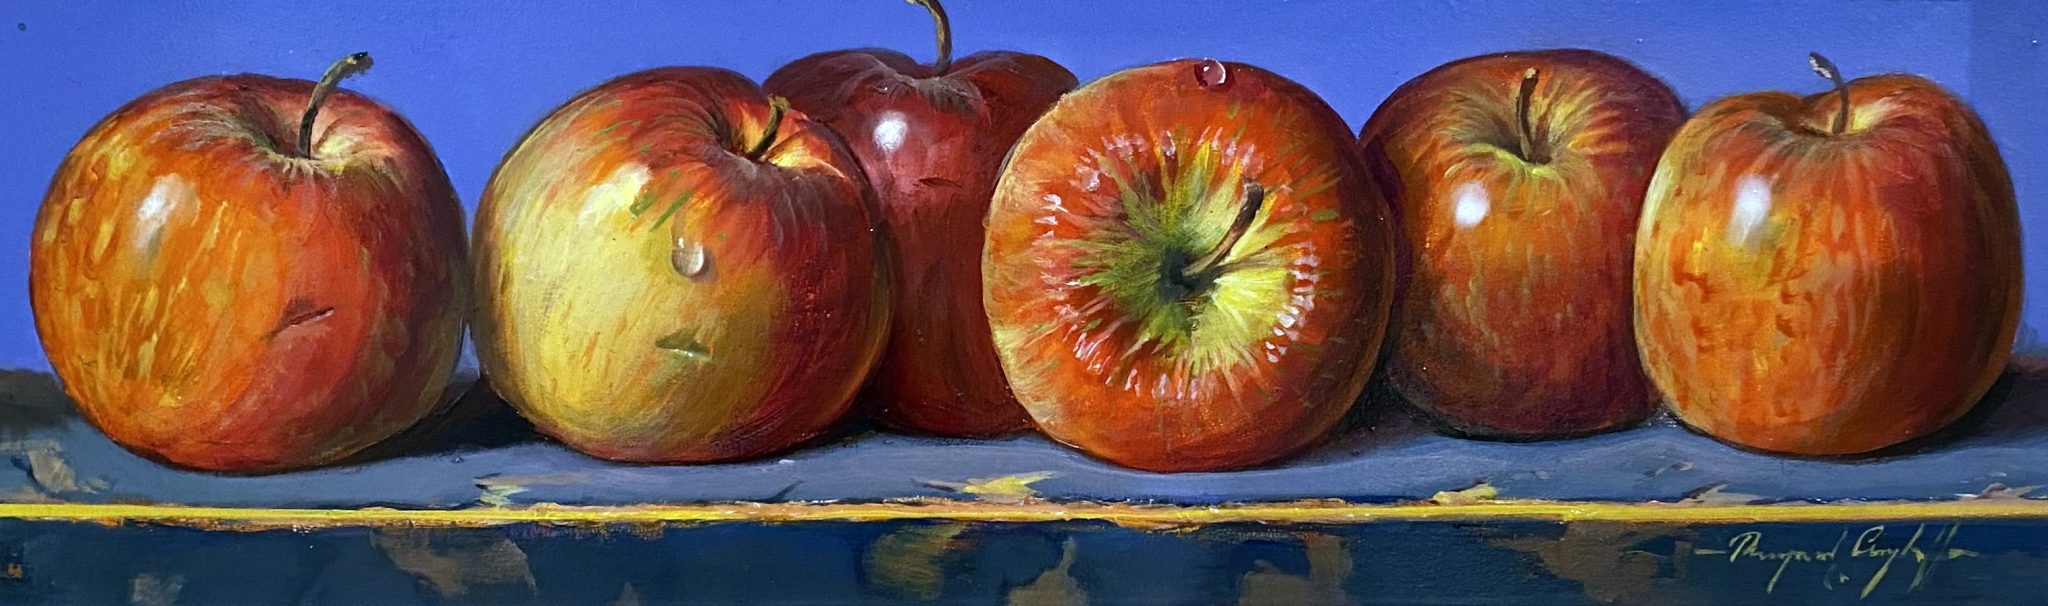 Apples is an original painting by the talented artist Raymond Campbell.